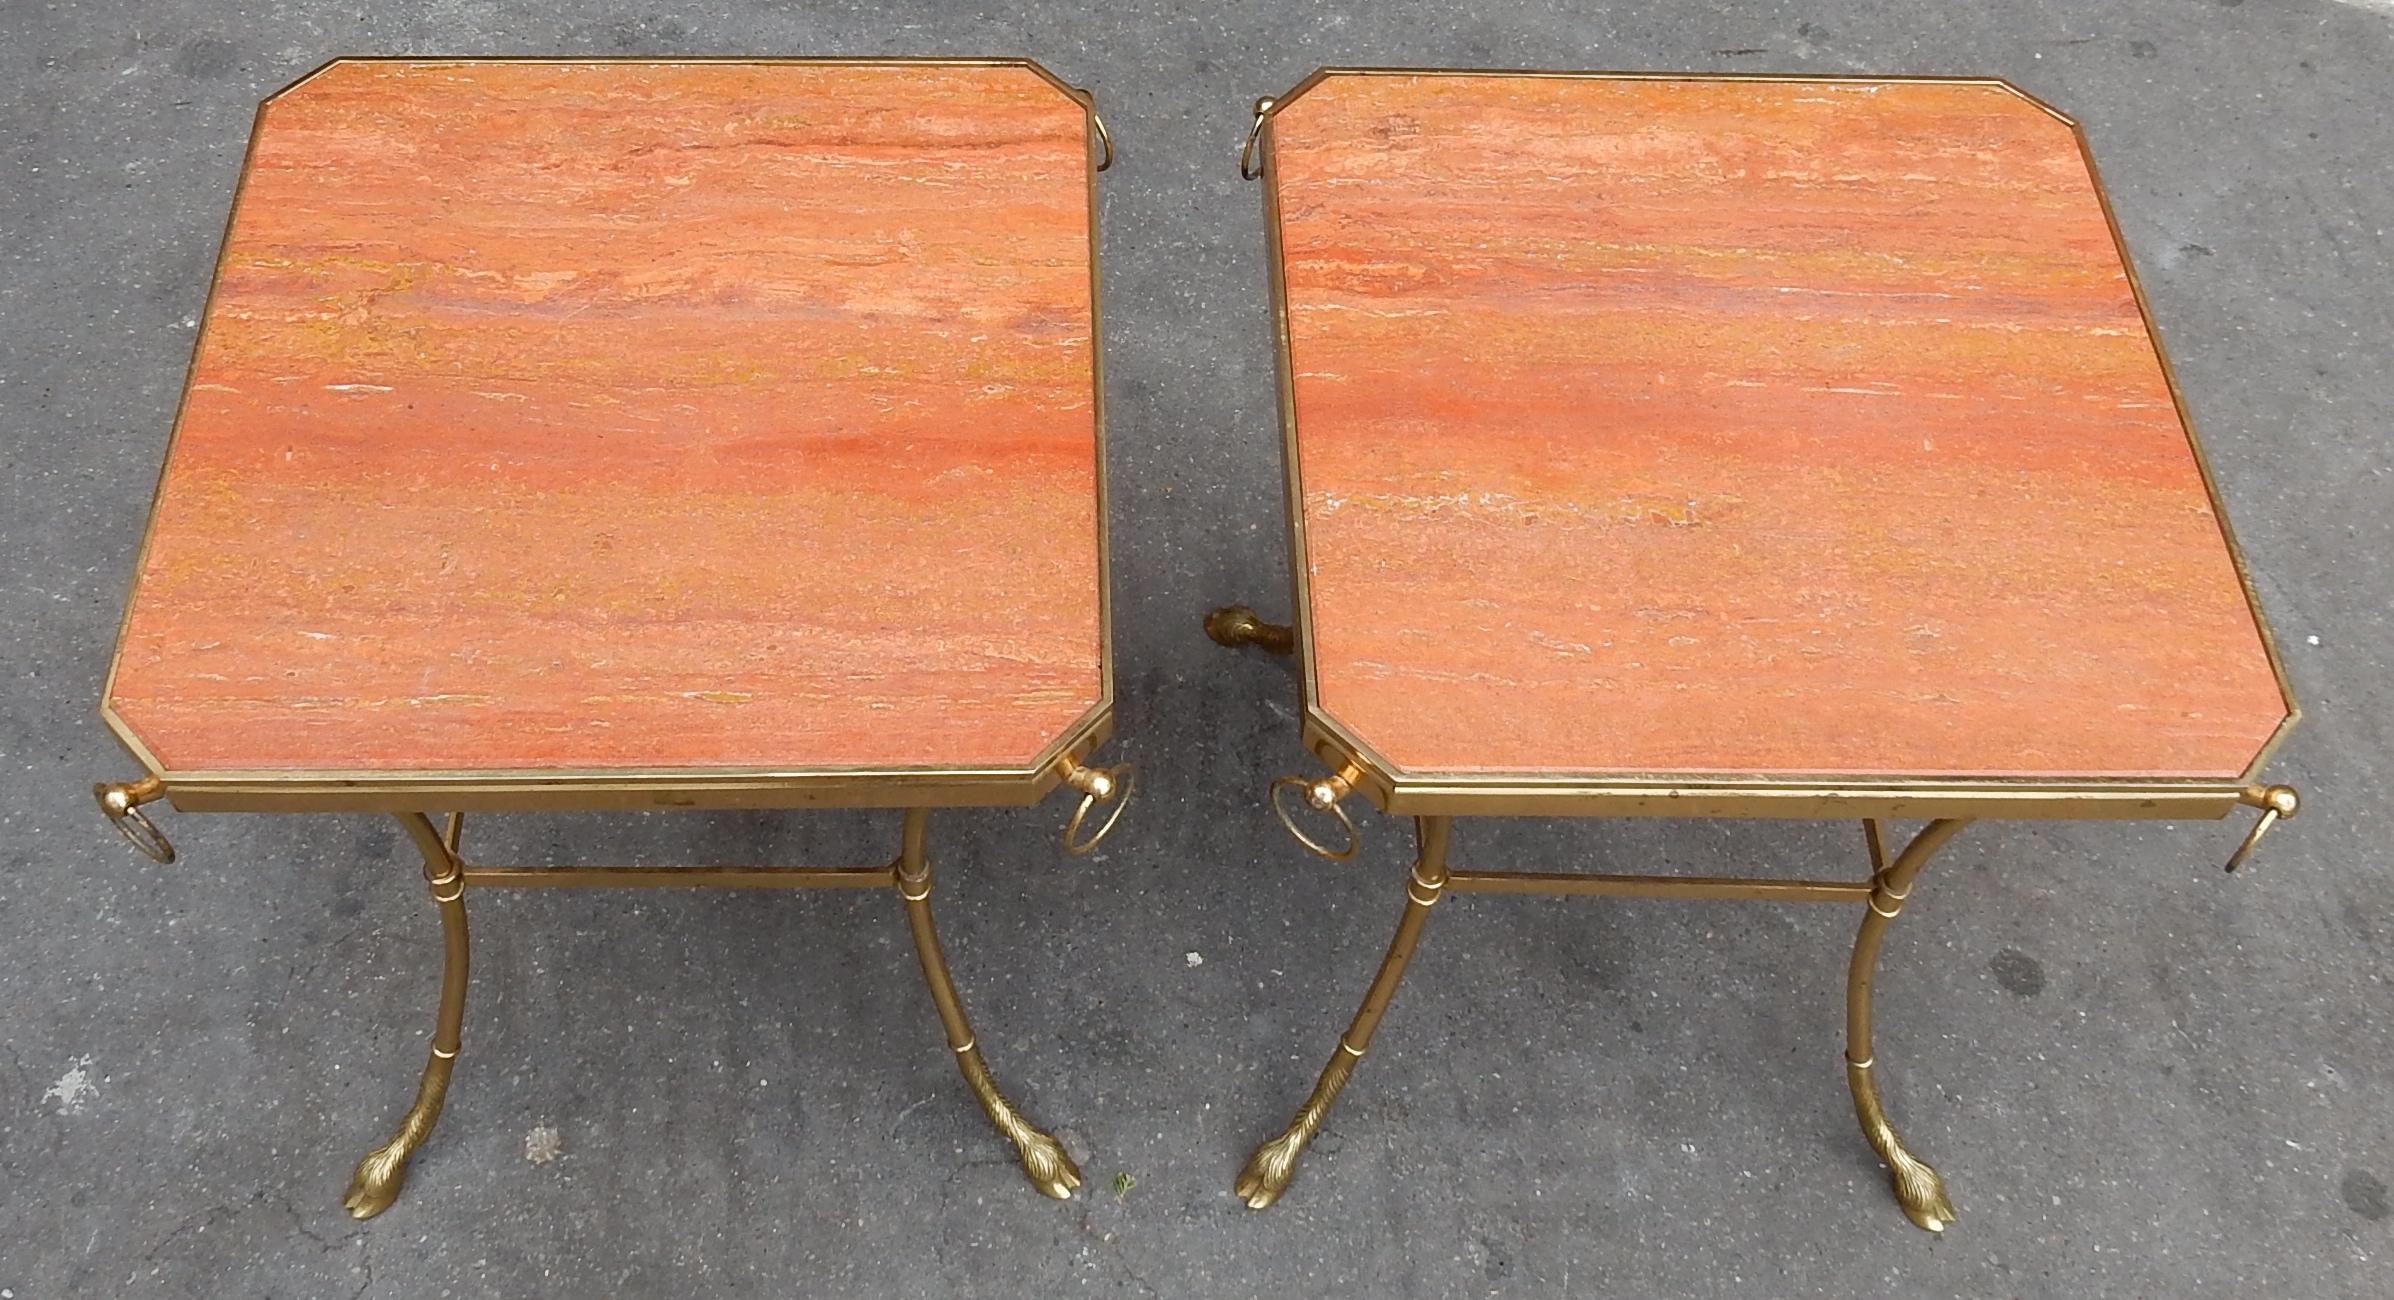 Bronze 1970 Pair of Octagonal Pedestals Jacques Charpentier and Red Travertine of Iran For Sale